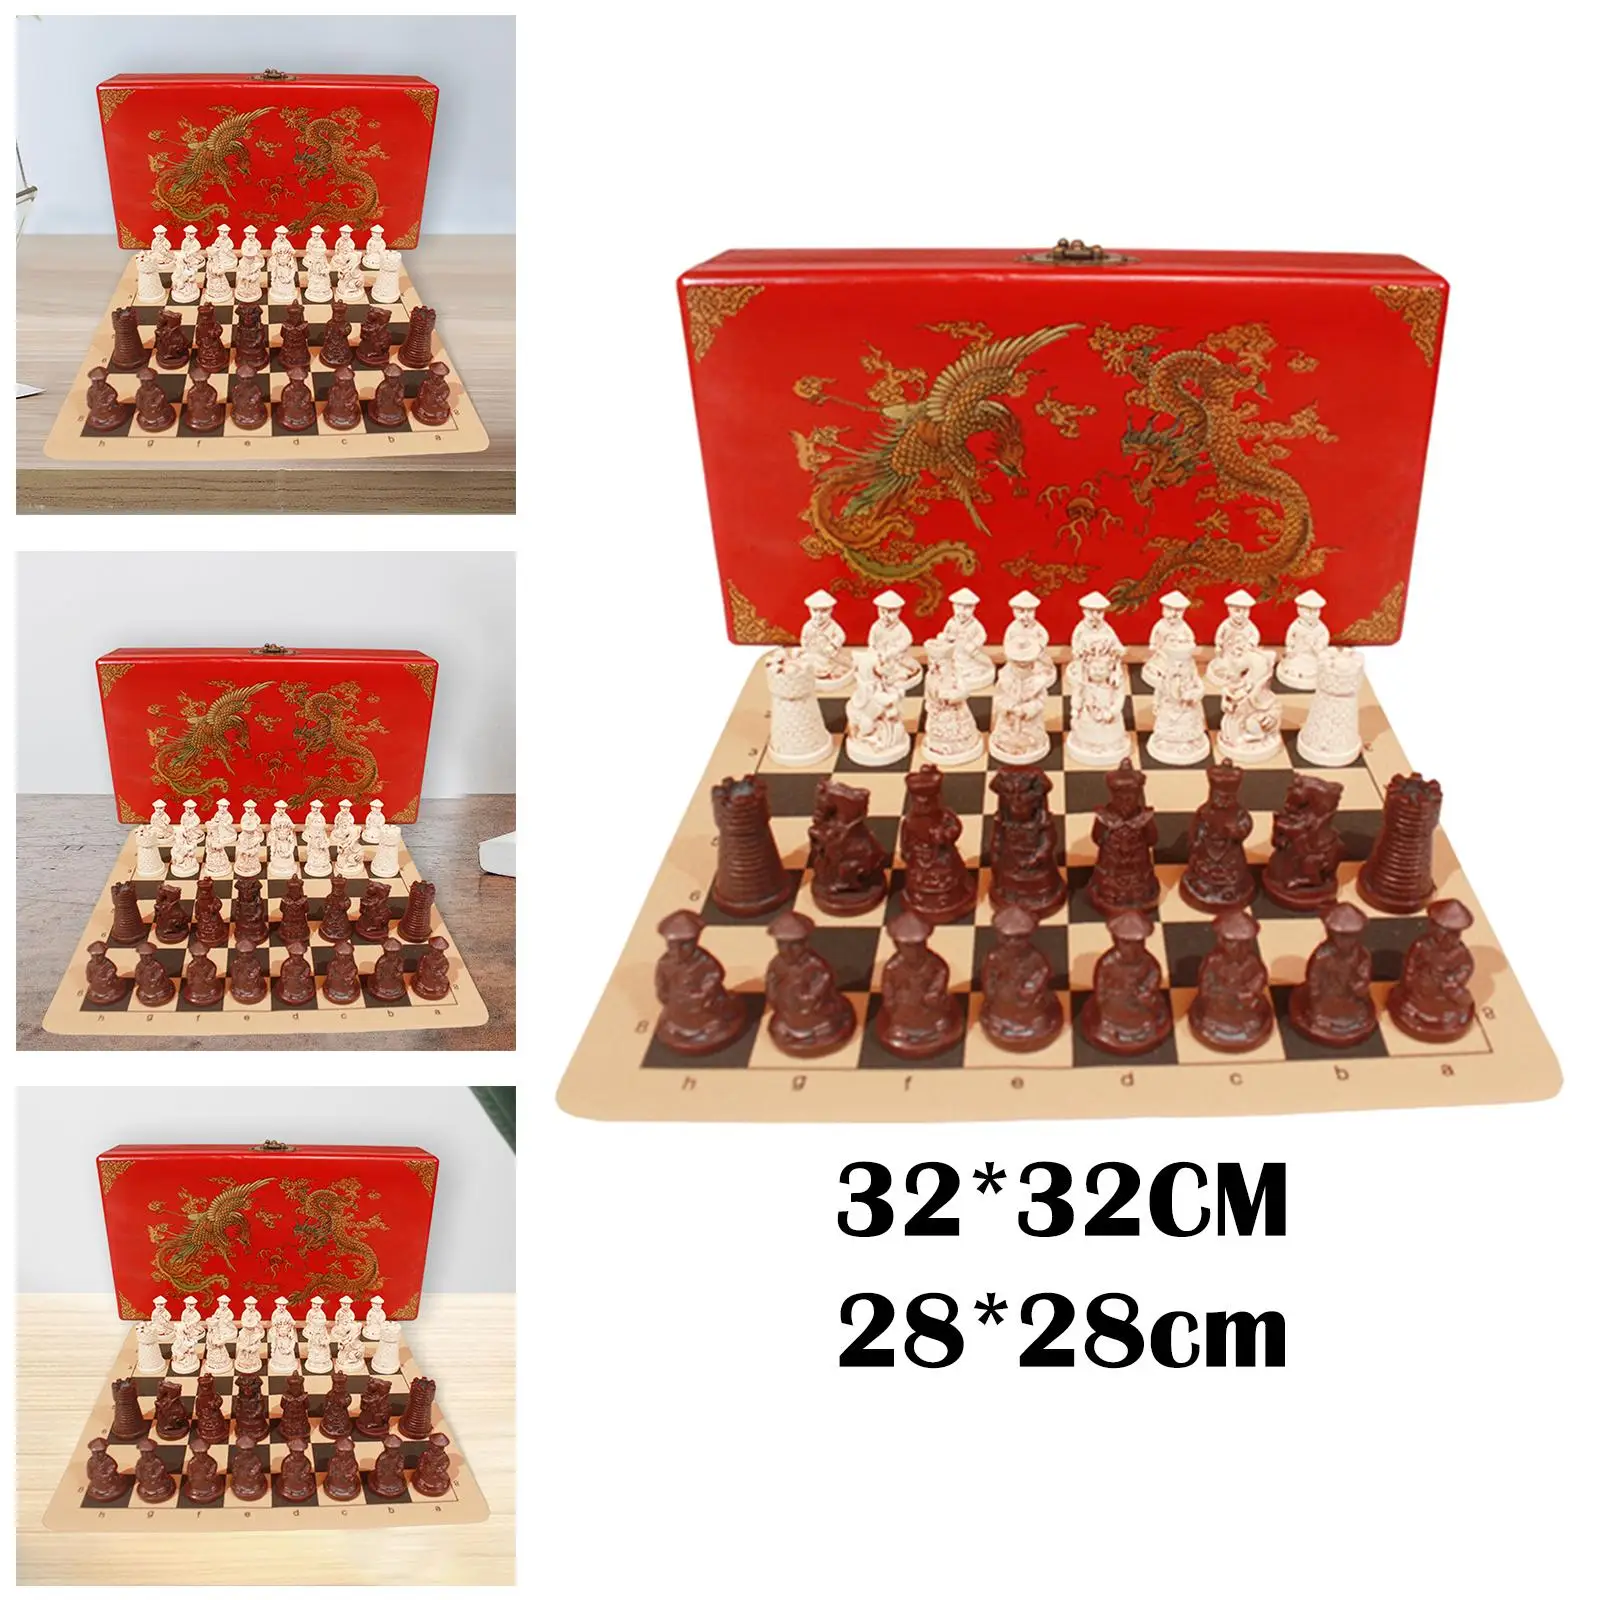 Handmade Chess Set Deluxe Wooden Chess Board Chess Pieces for Adults Indoor Game Entertainment Travel Enjoy Leisure Time